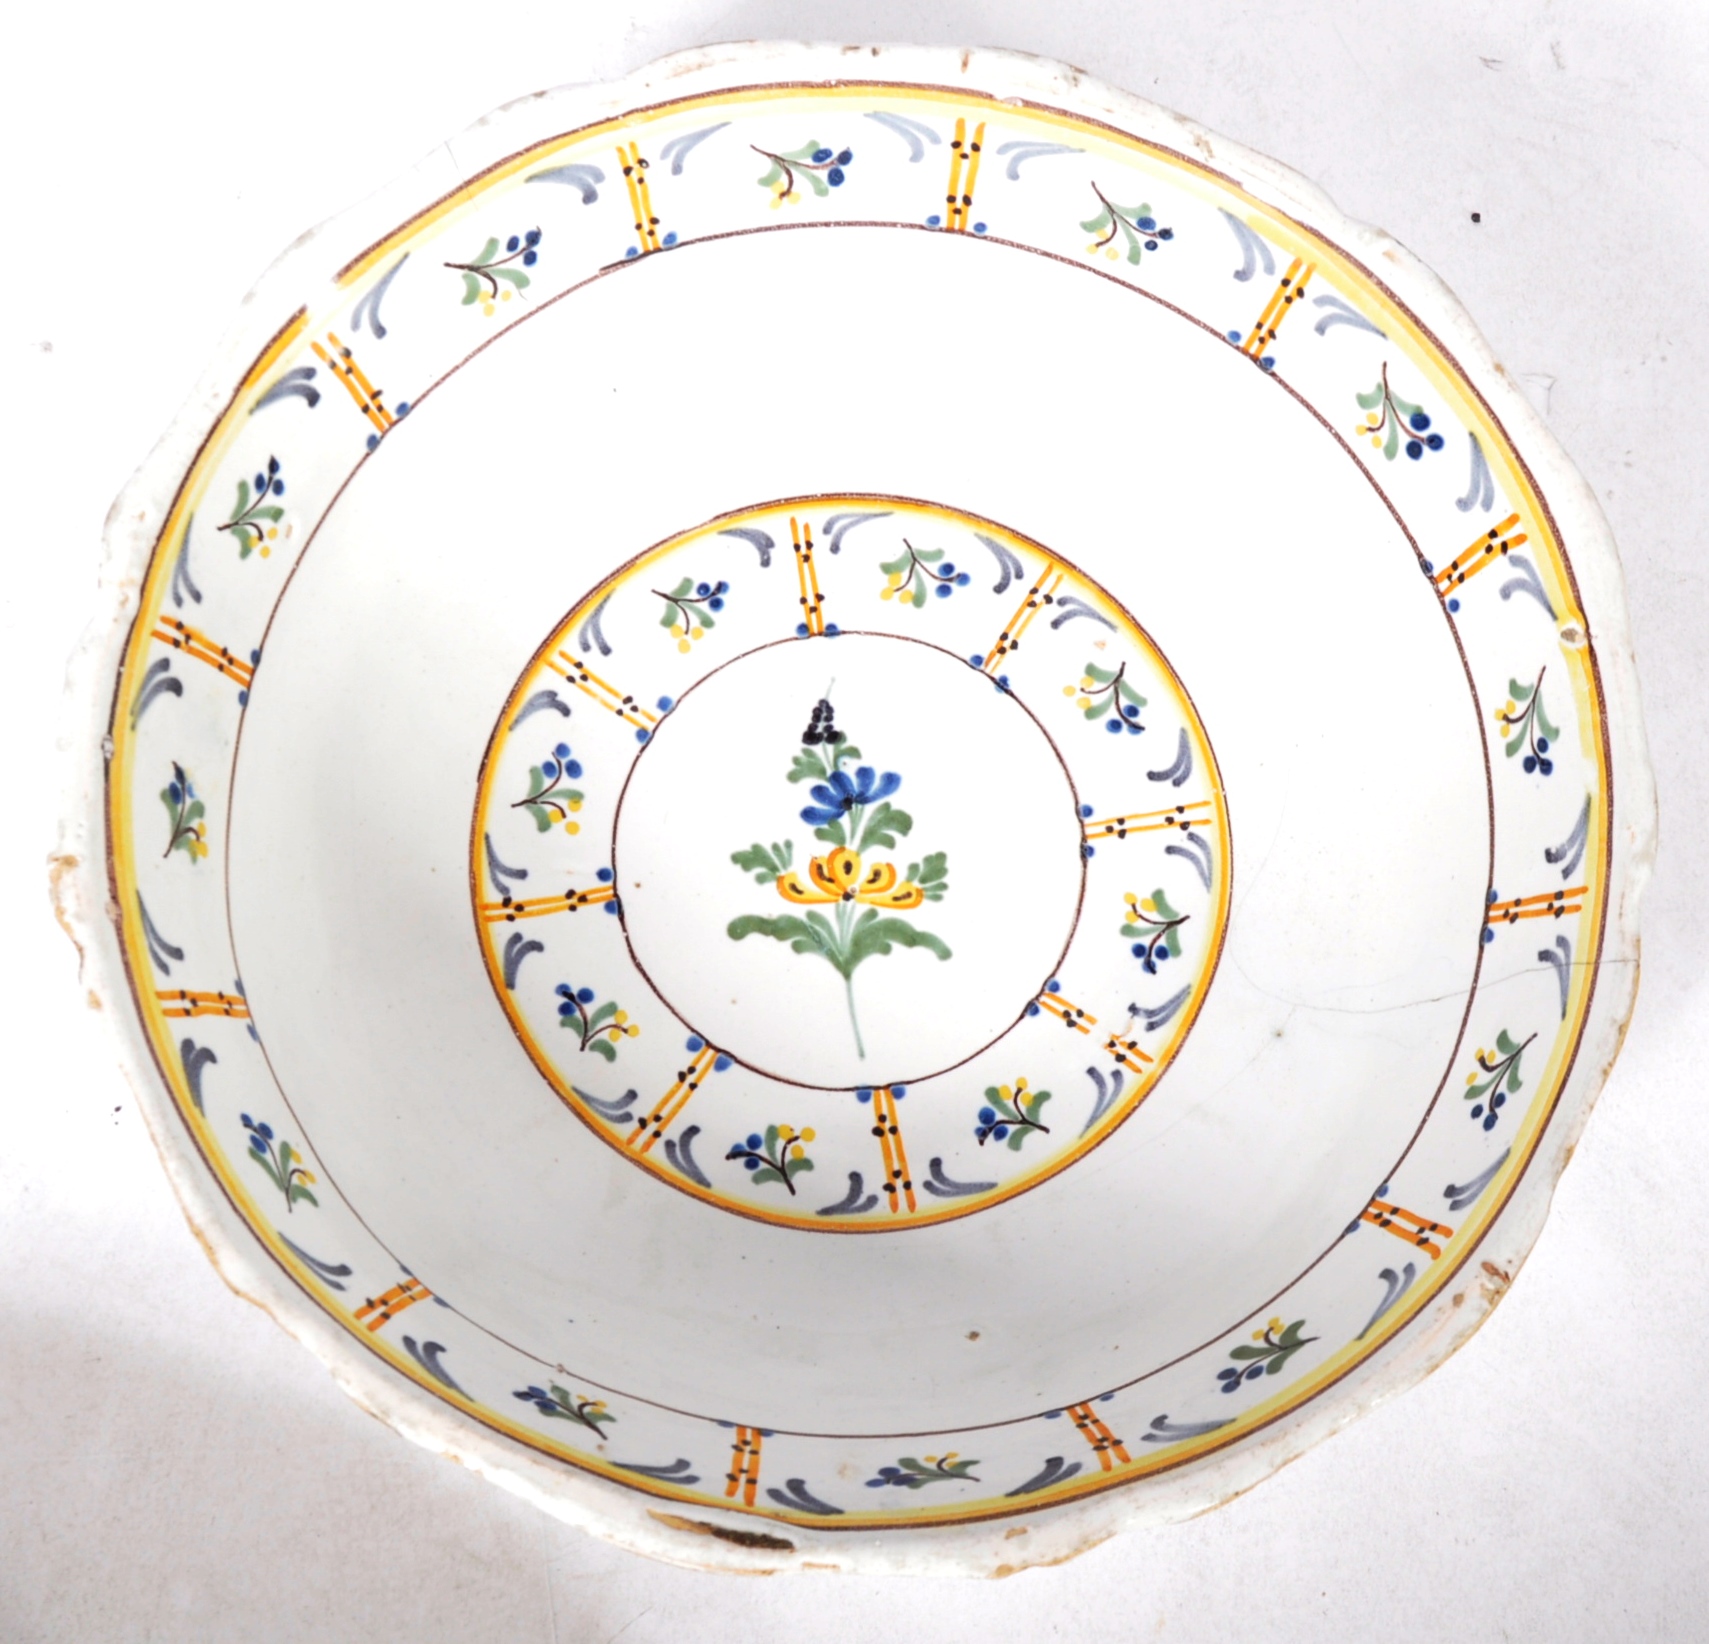 THREE 18TH / 19TH CENTURY FRENCH FAIENCE BOWLS - Image 3 of 6